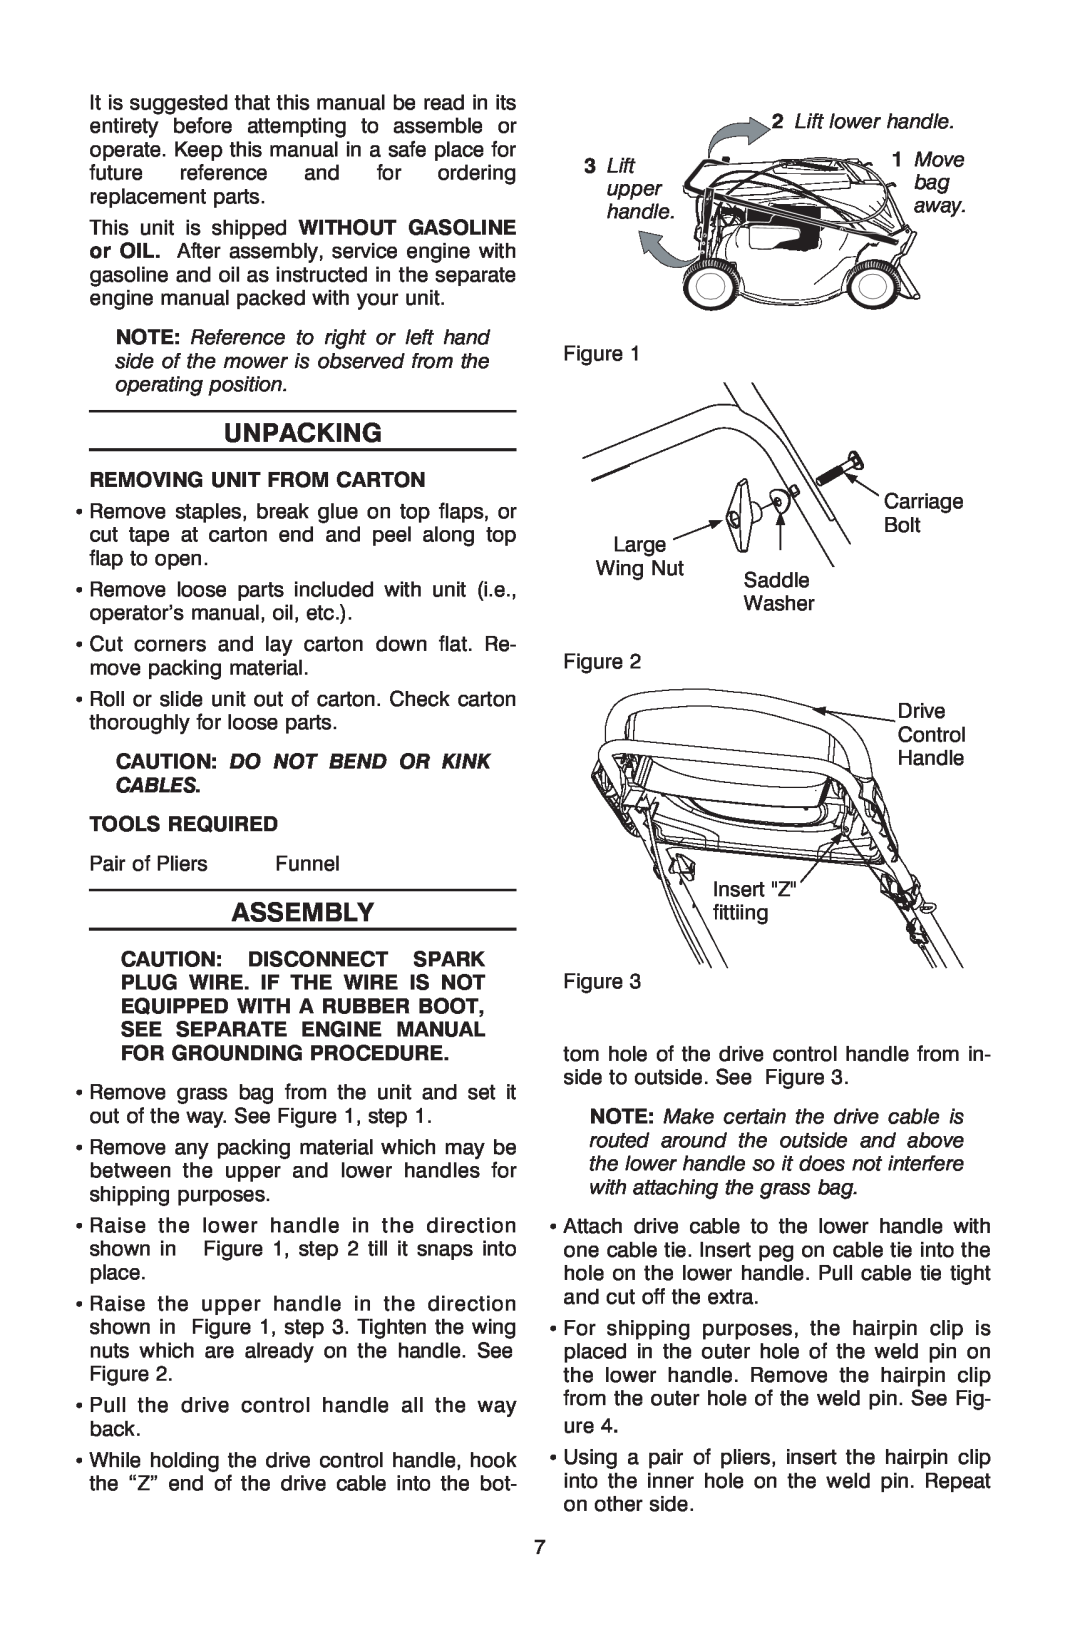 Troy-Bilt OG-4605 owner manual Unpacking, Assembly, Removing Unit From Carton, Tools Required 